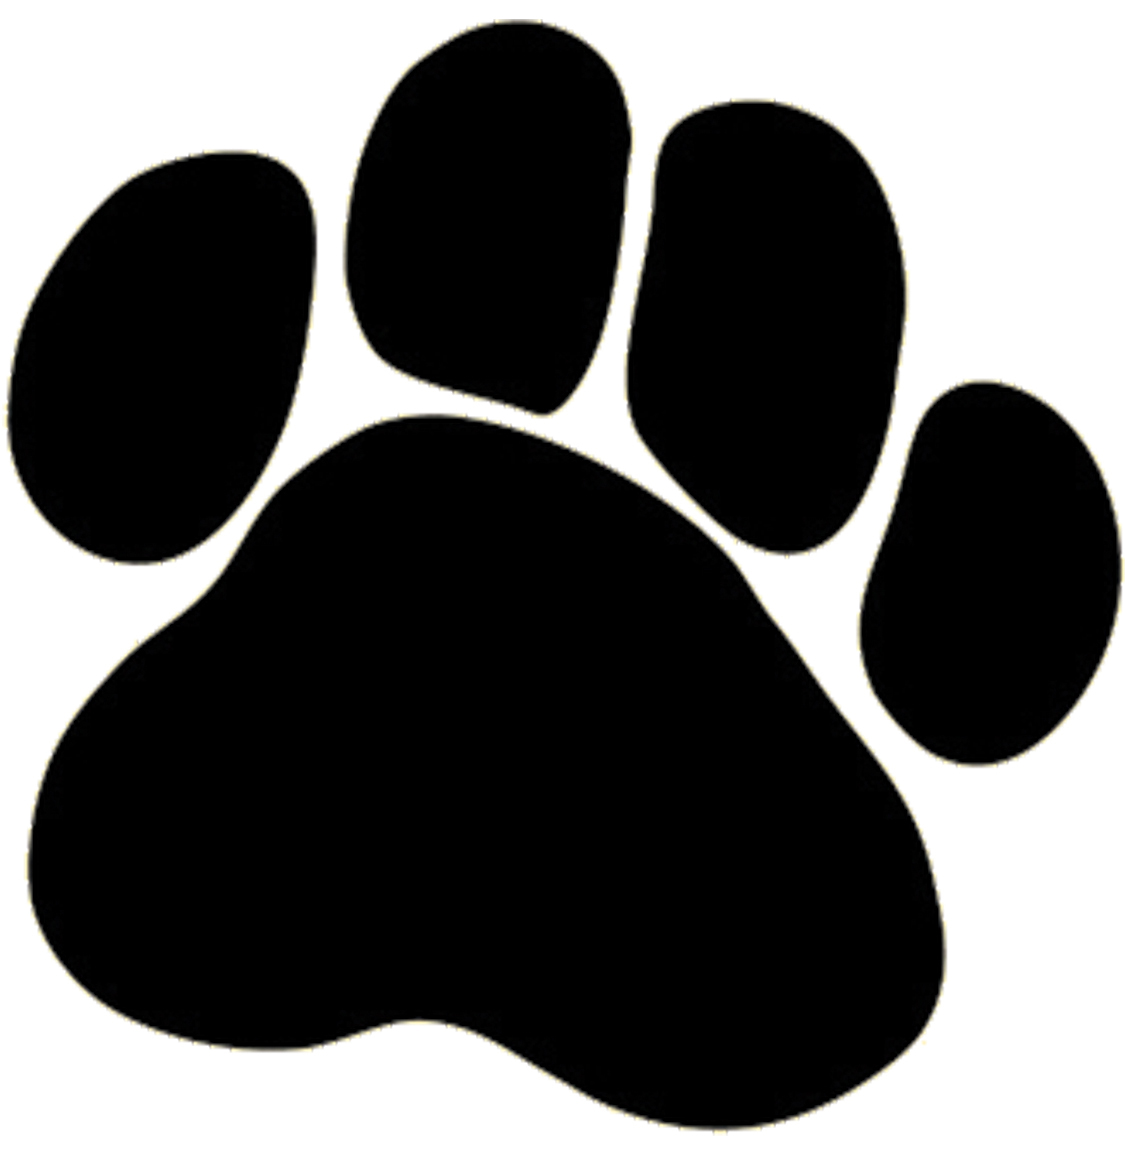 Animal Paw Print Tattoo Designs Clipart - Free Clip Art Images